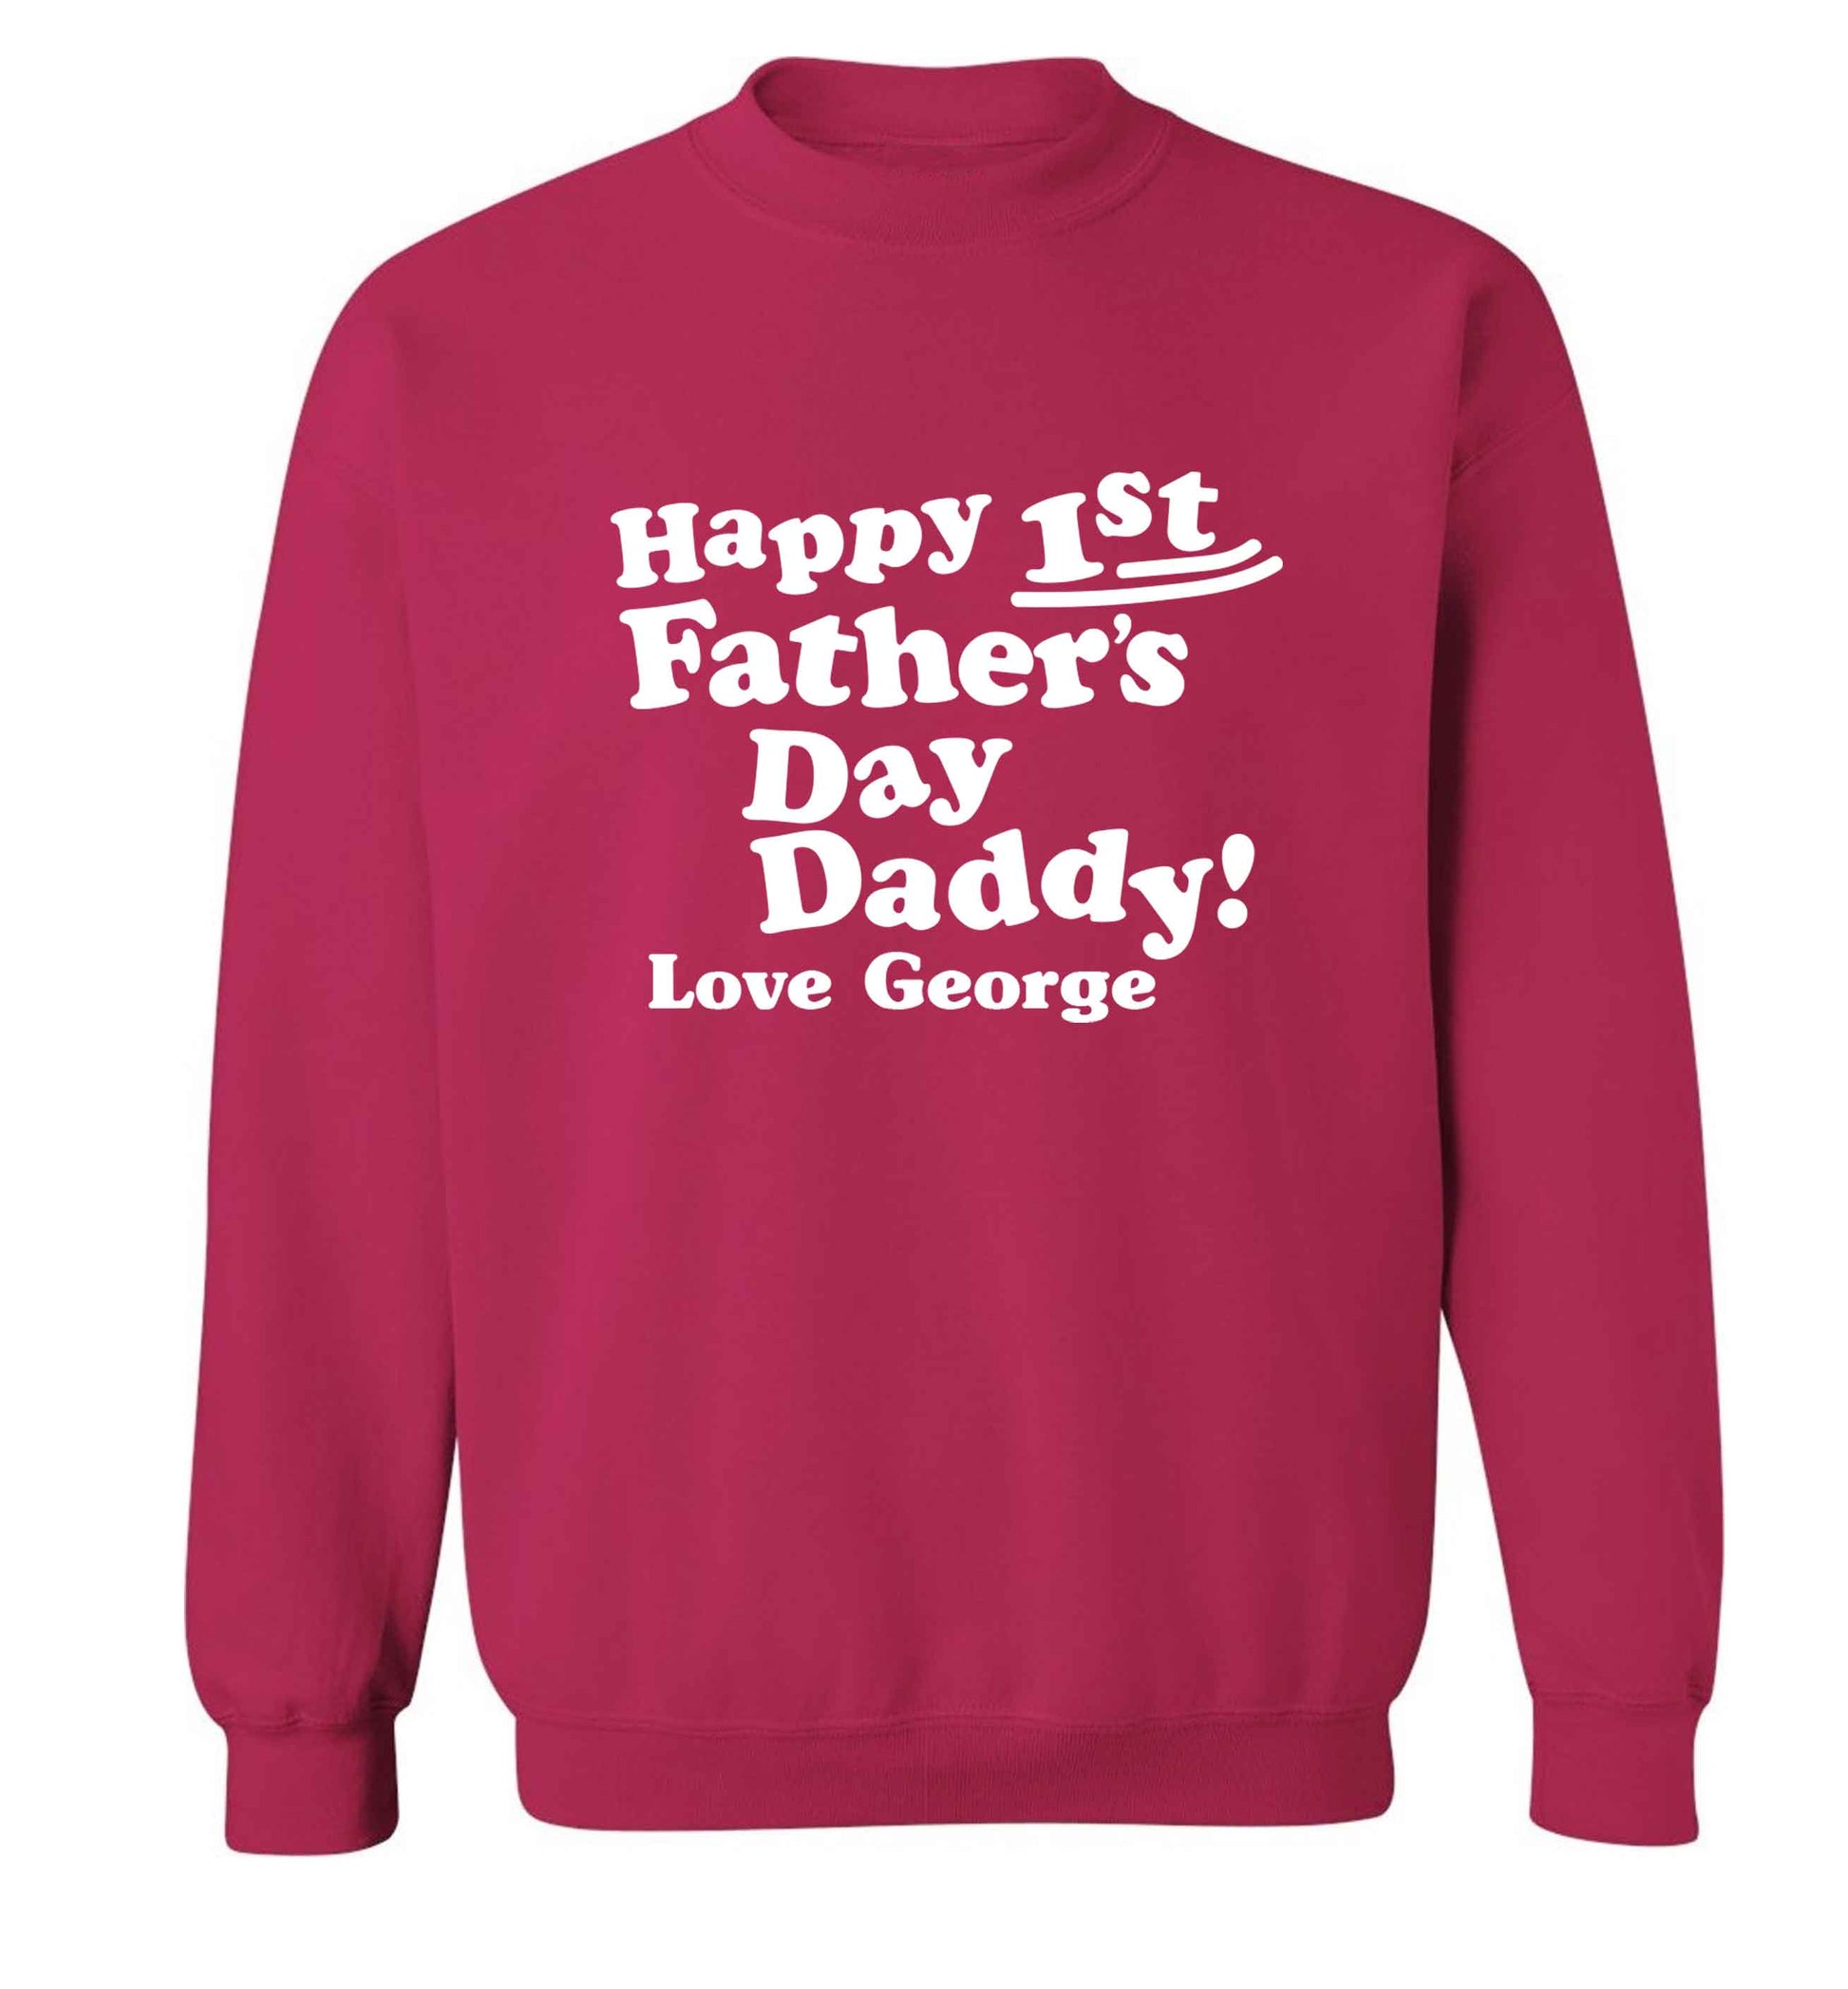 Happy first Fathers Day daddy love personalised adult's unisex pink sweater 2XL